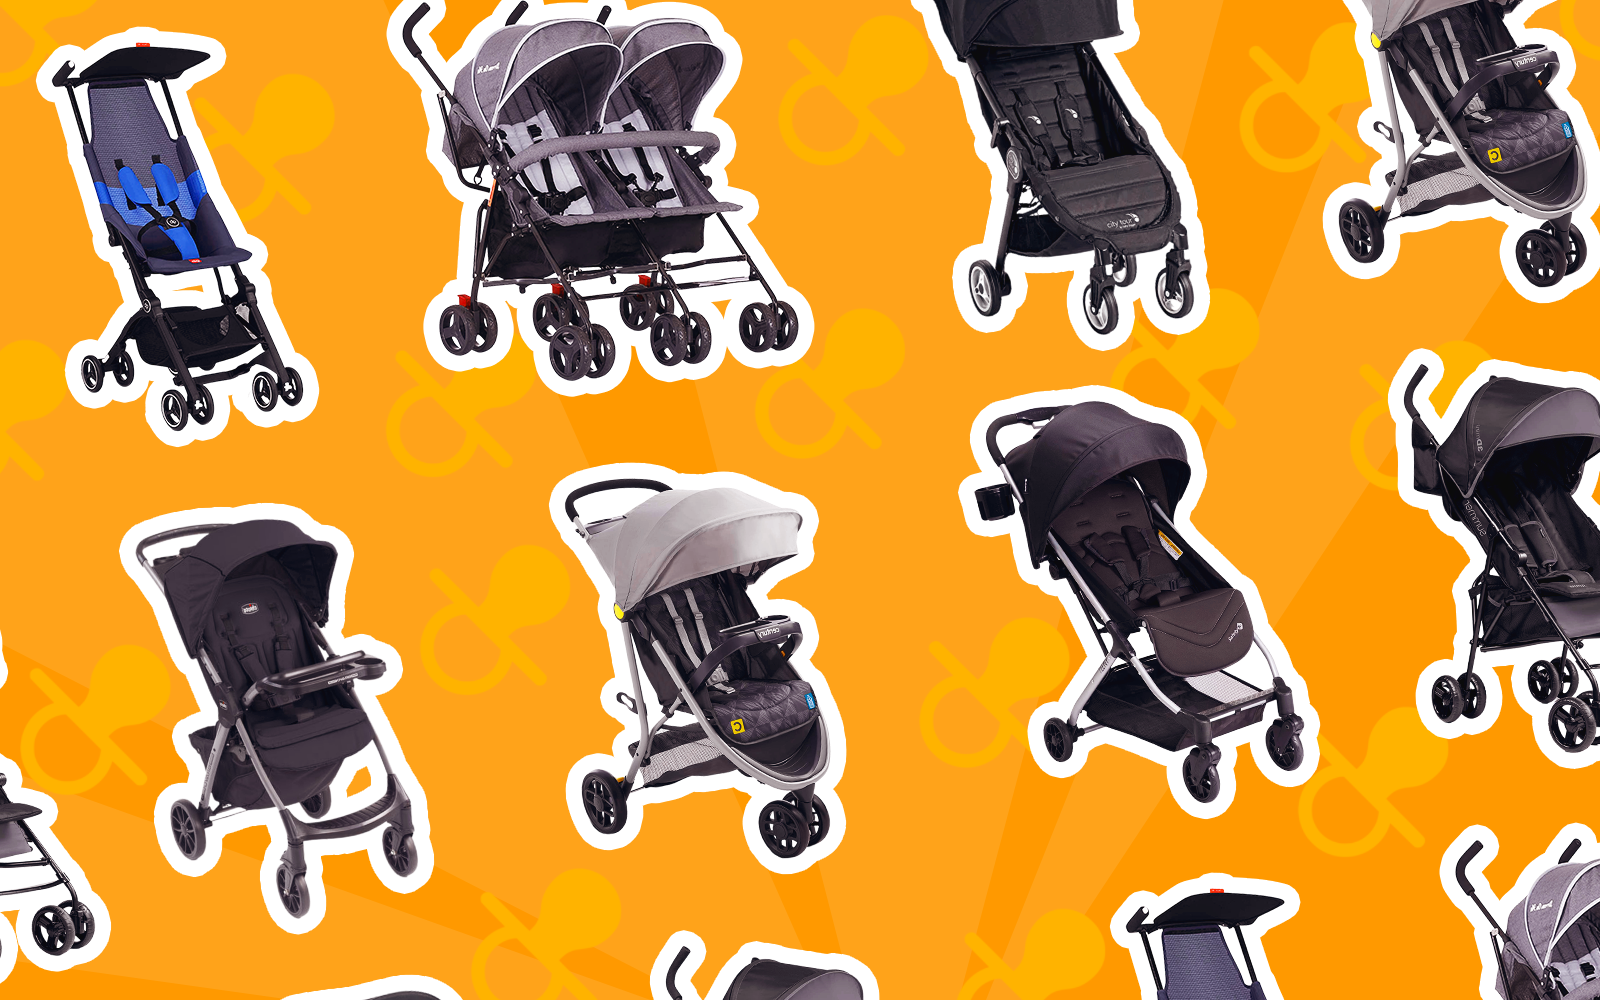 Image of several of the best travel strollers in a layflat image on an orange background